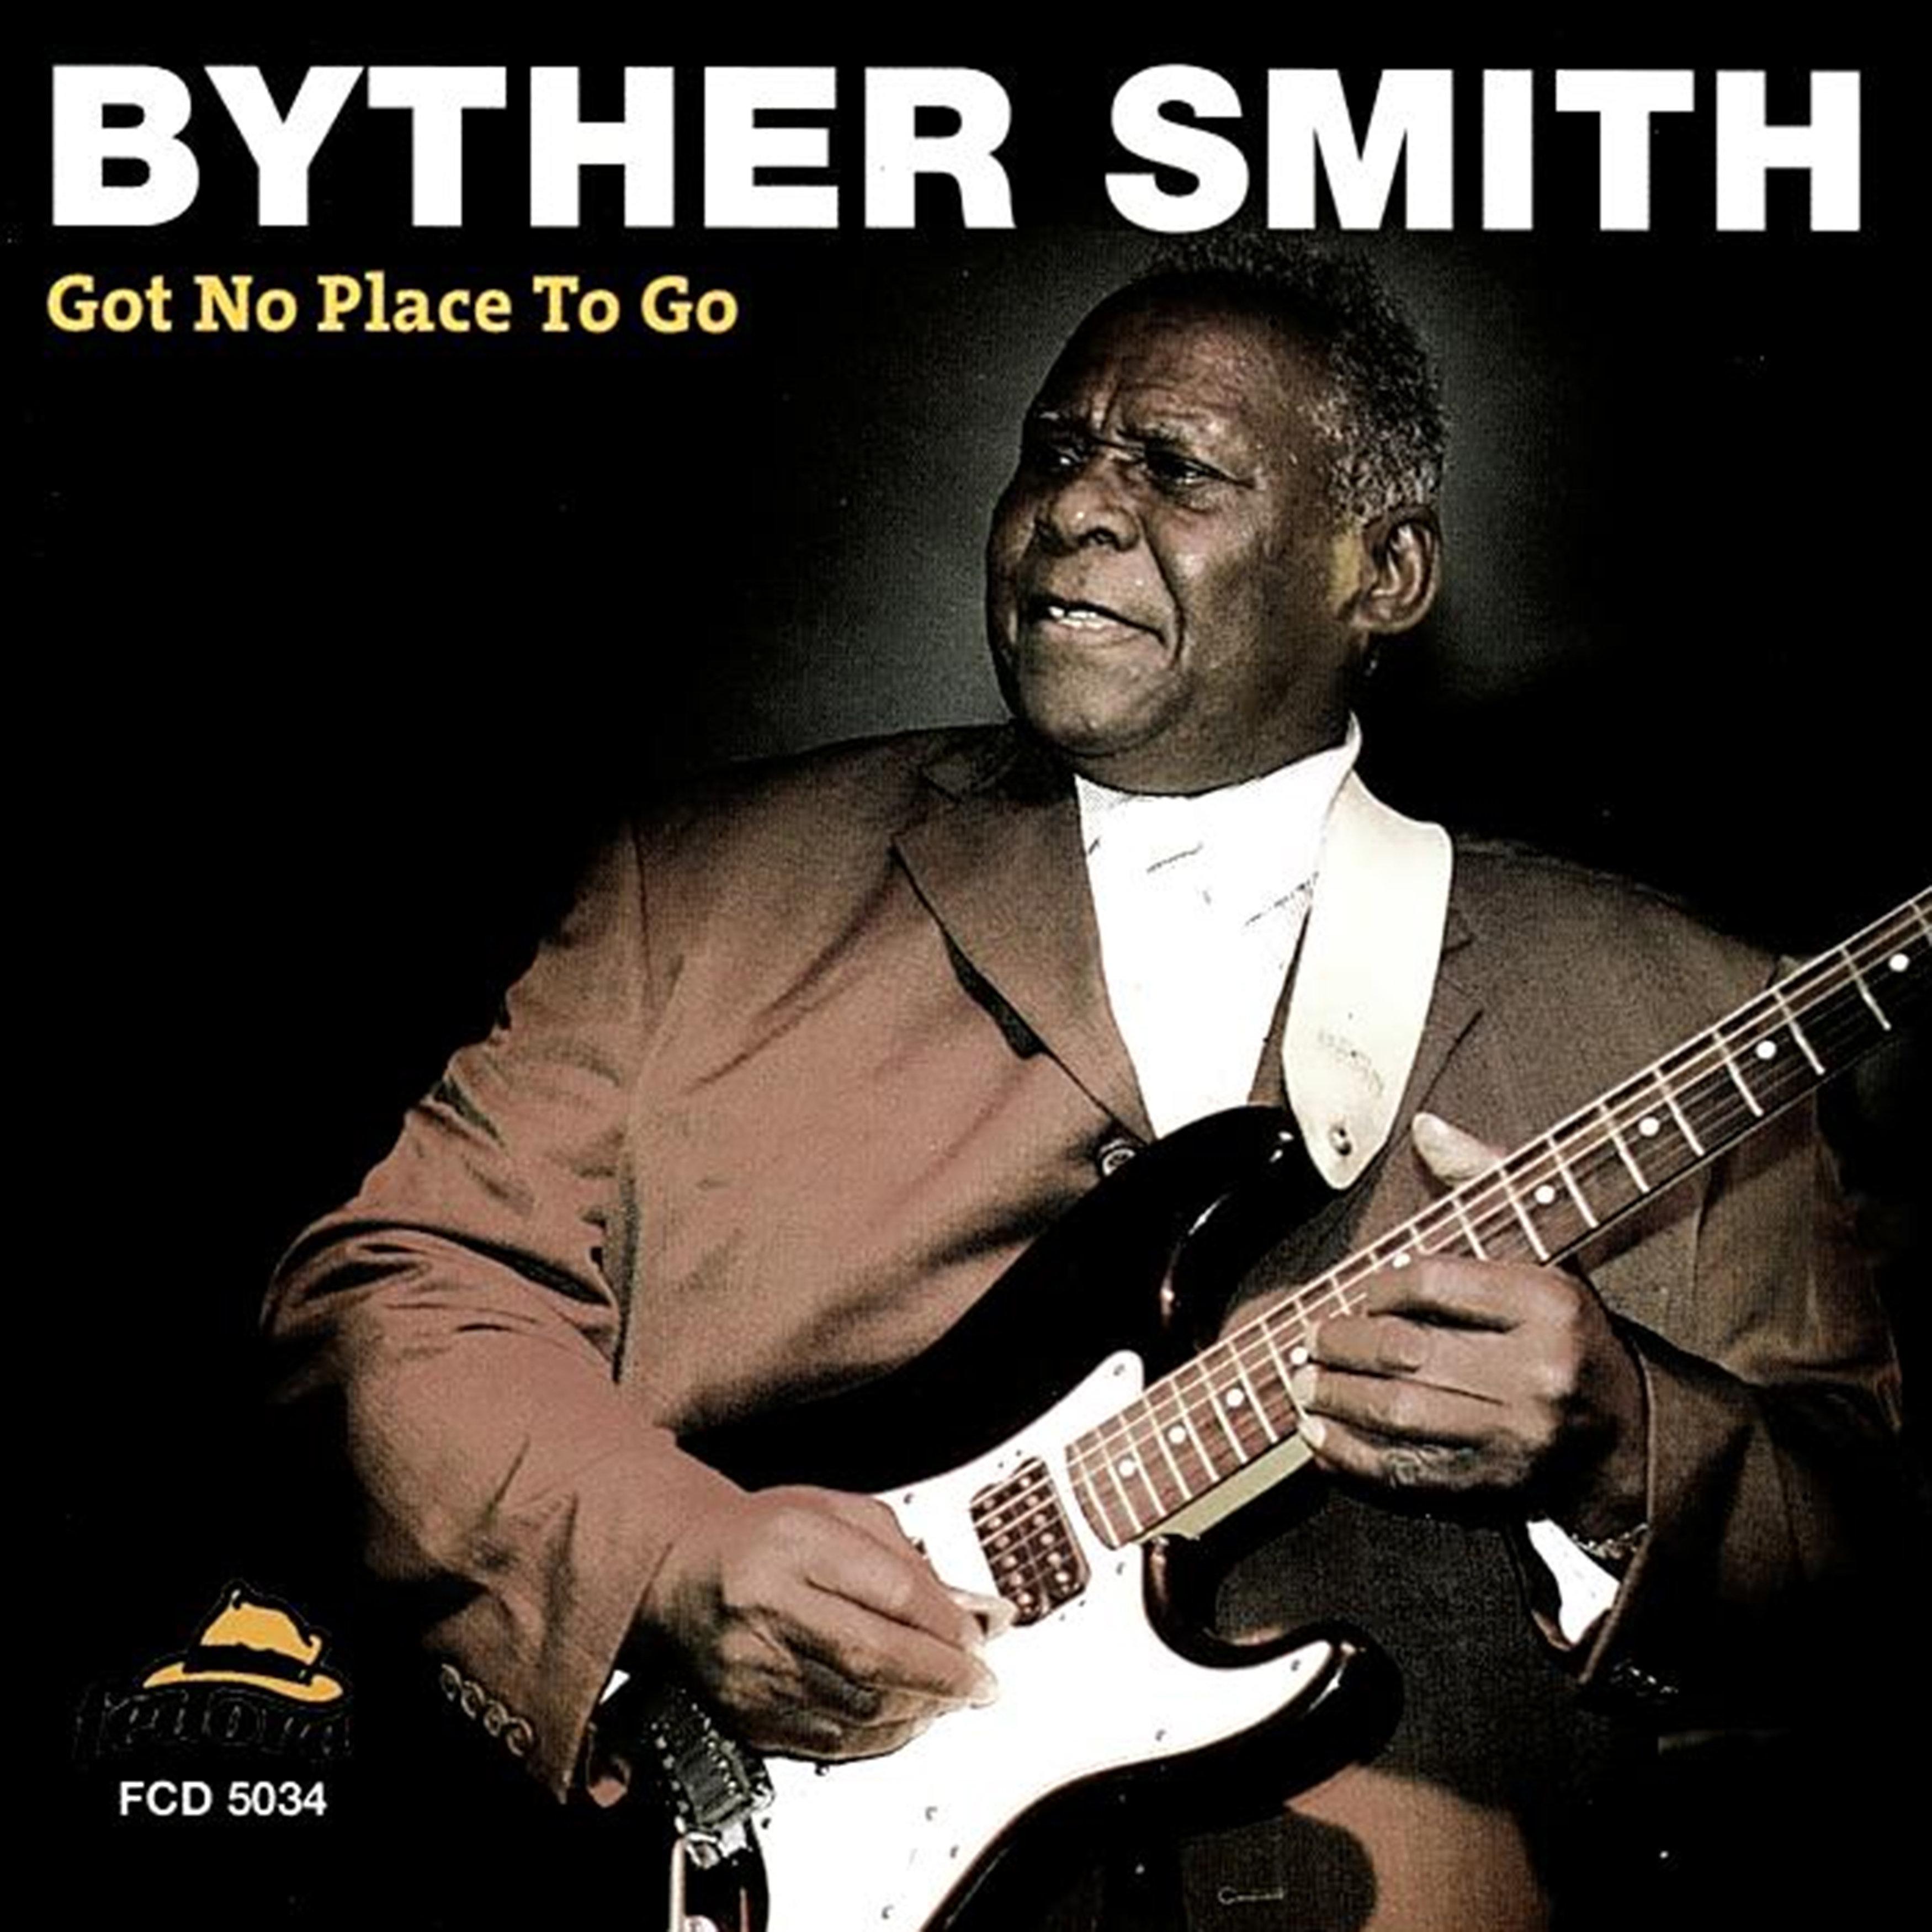 35 Long Years歌词 歌手Byther Smith-专辑Got No Place to Go-单曲《35 Long Years》LRC歌词下载